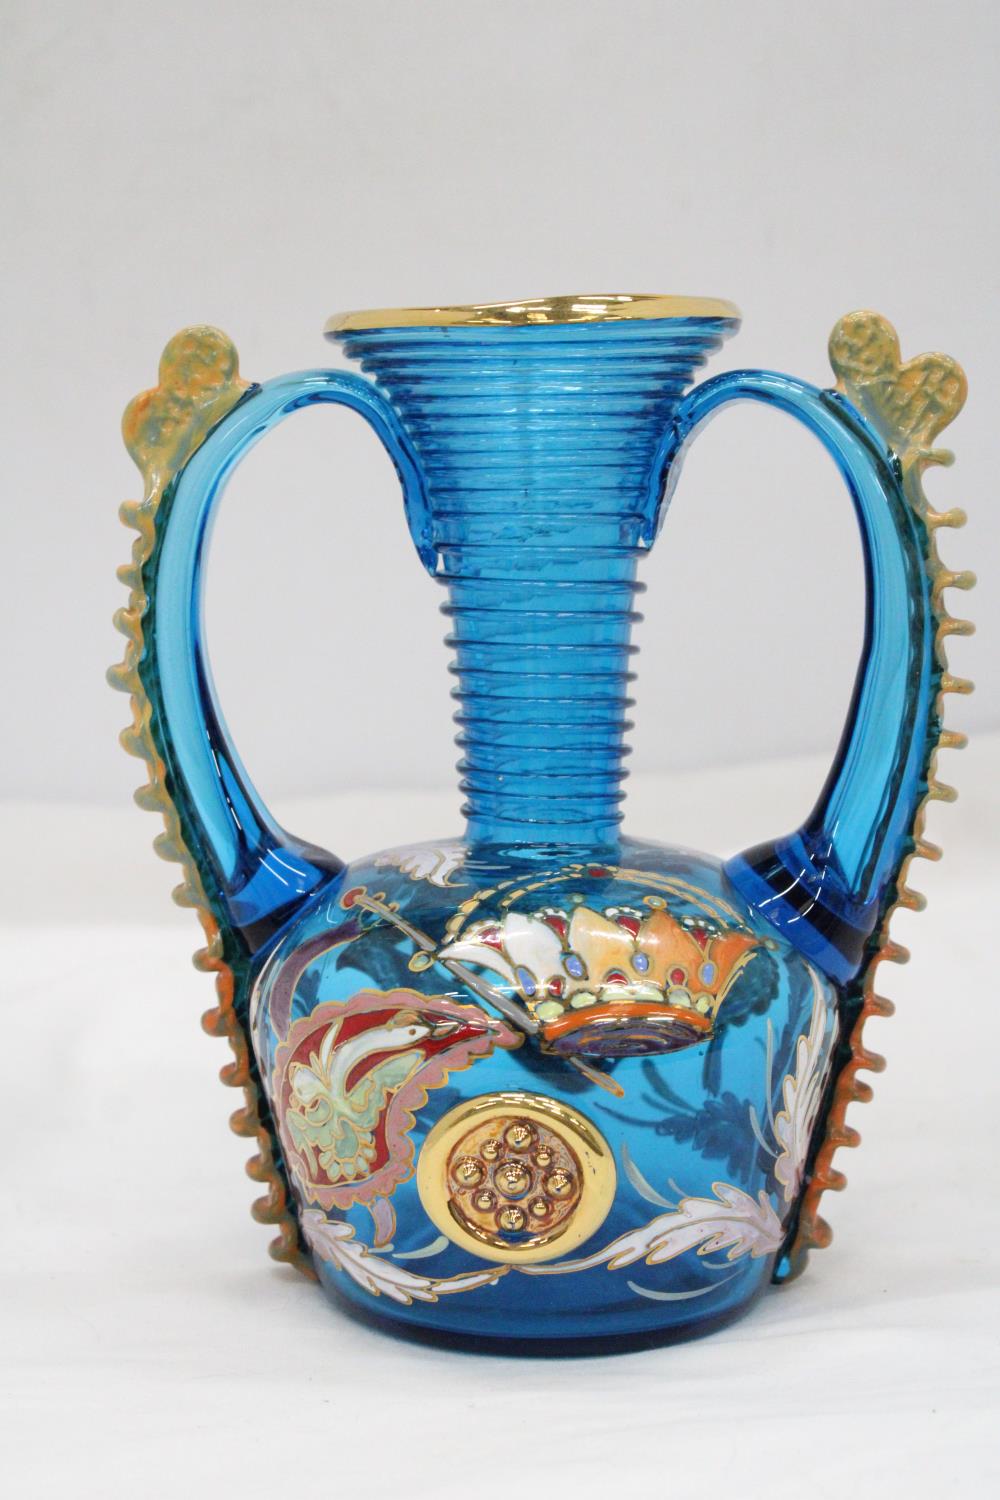 A 1960'S/70'S, LARGE ROYO GLASS VASE WITH GILDED ENAMEL DECORATION, HEIGHT 20CM - Image 4 of 6